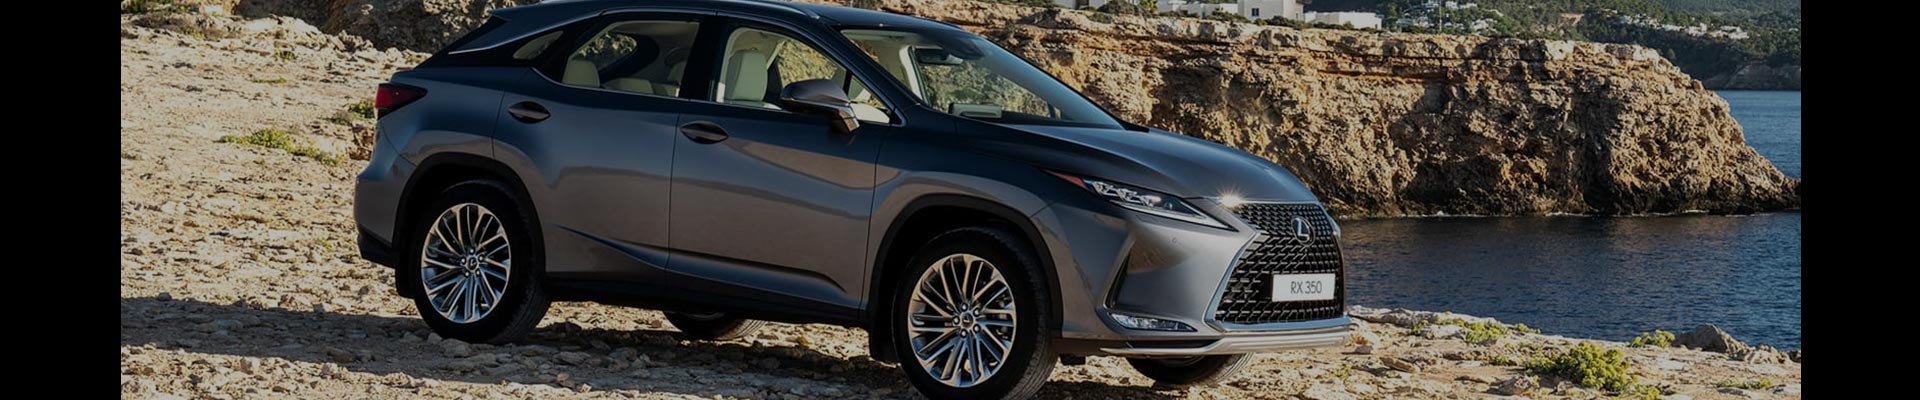 Shop Replacement and OEM 2019 Lexus RX350 Parts with Discounted Price on the Net